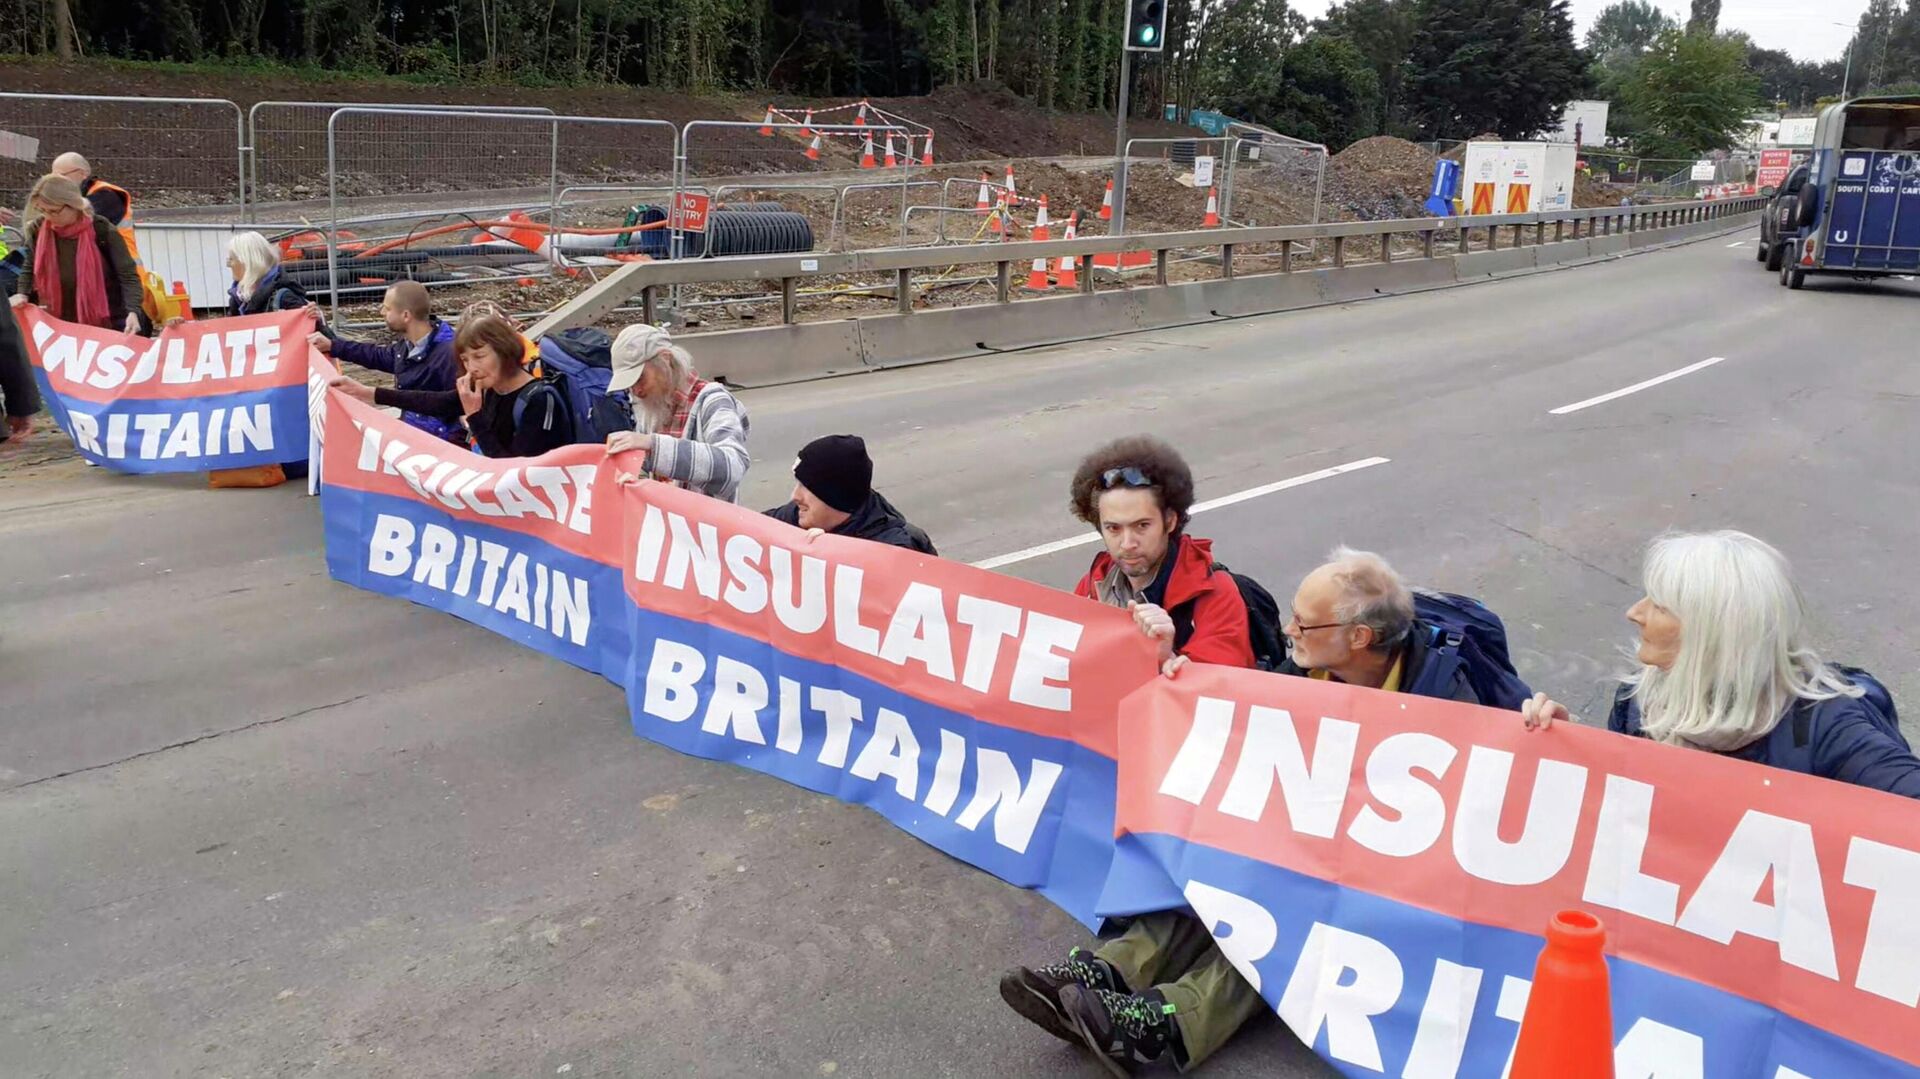 Members of Insulate Britain protest on M25 Motorway, Britain September 15, 2021, in this still image taken from a handout video - Sputnik International, 1920, 15.09.2021